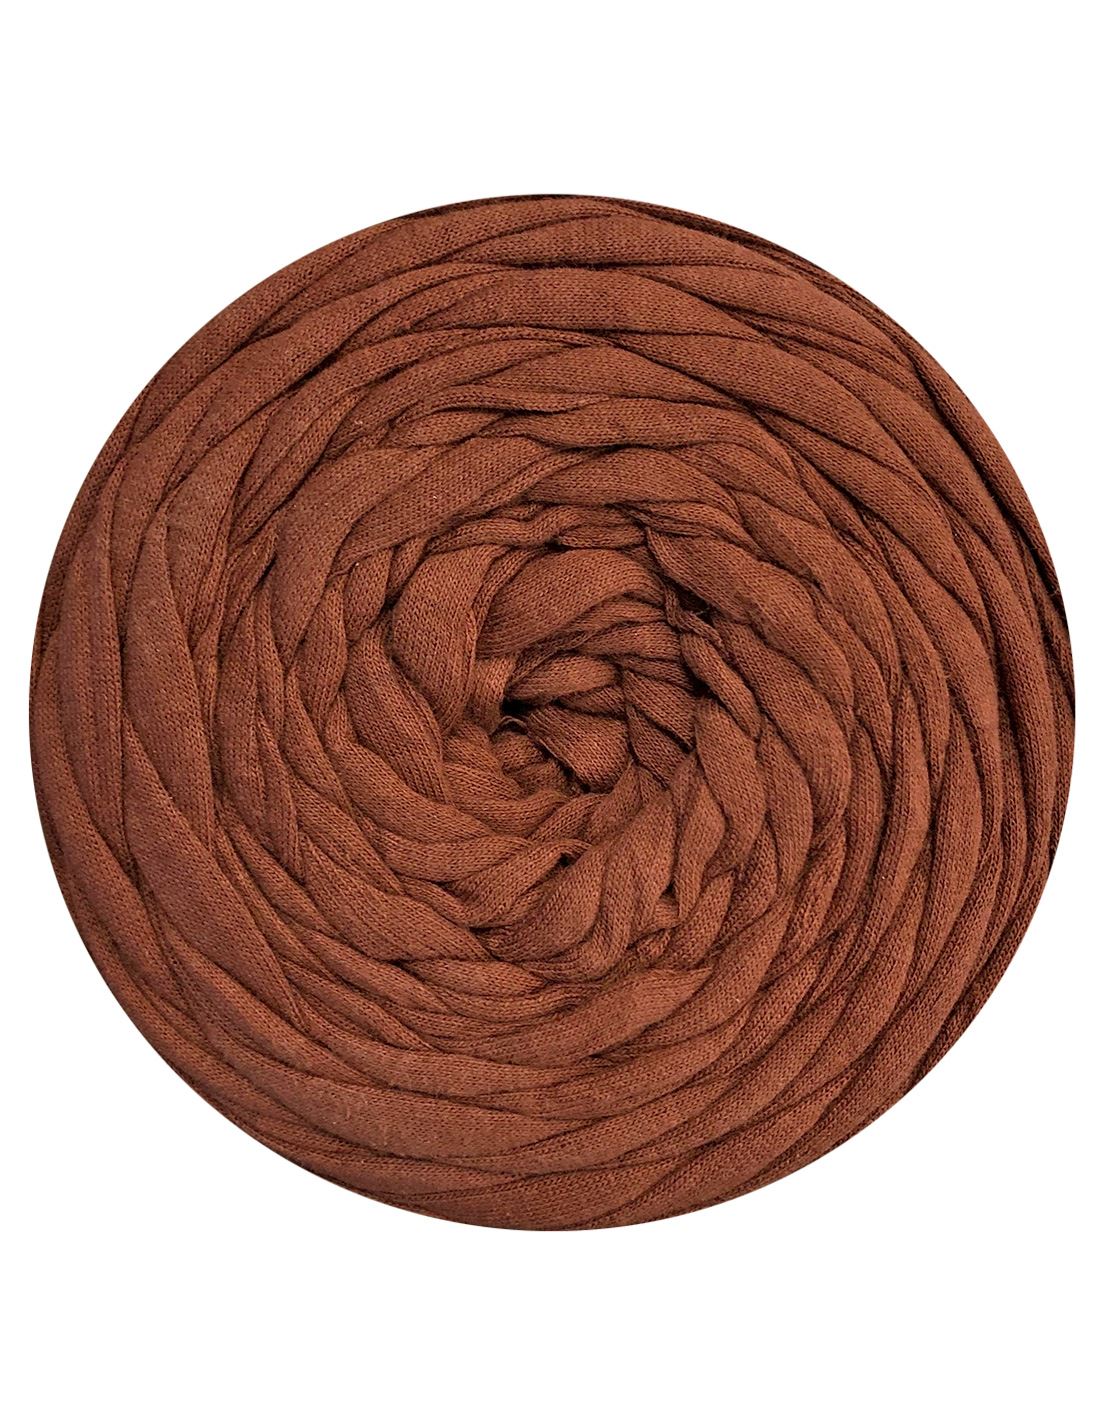 Hot chocolate brown t-shirt yarn by Hoooked Zpagetti (100-120m)